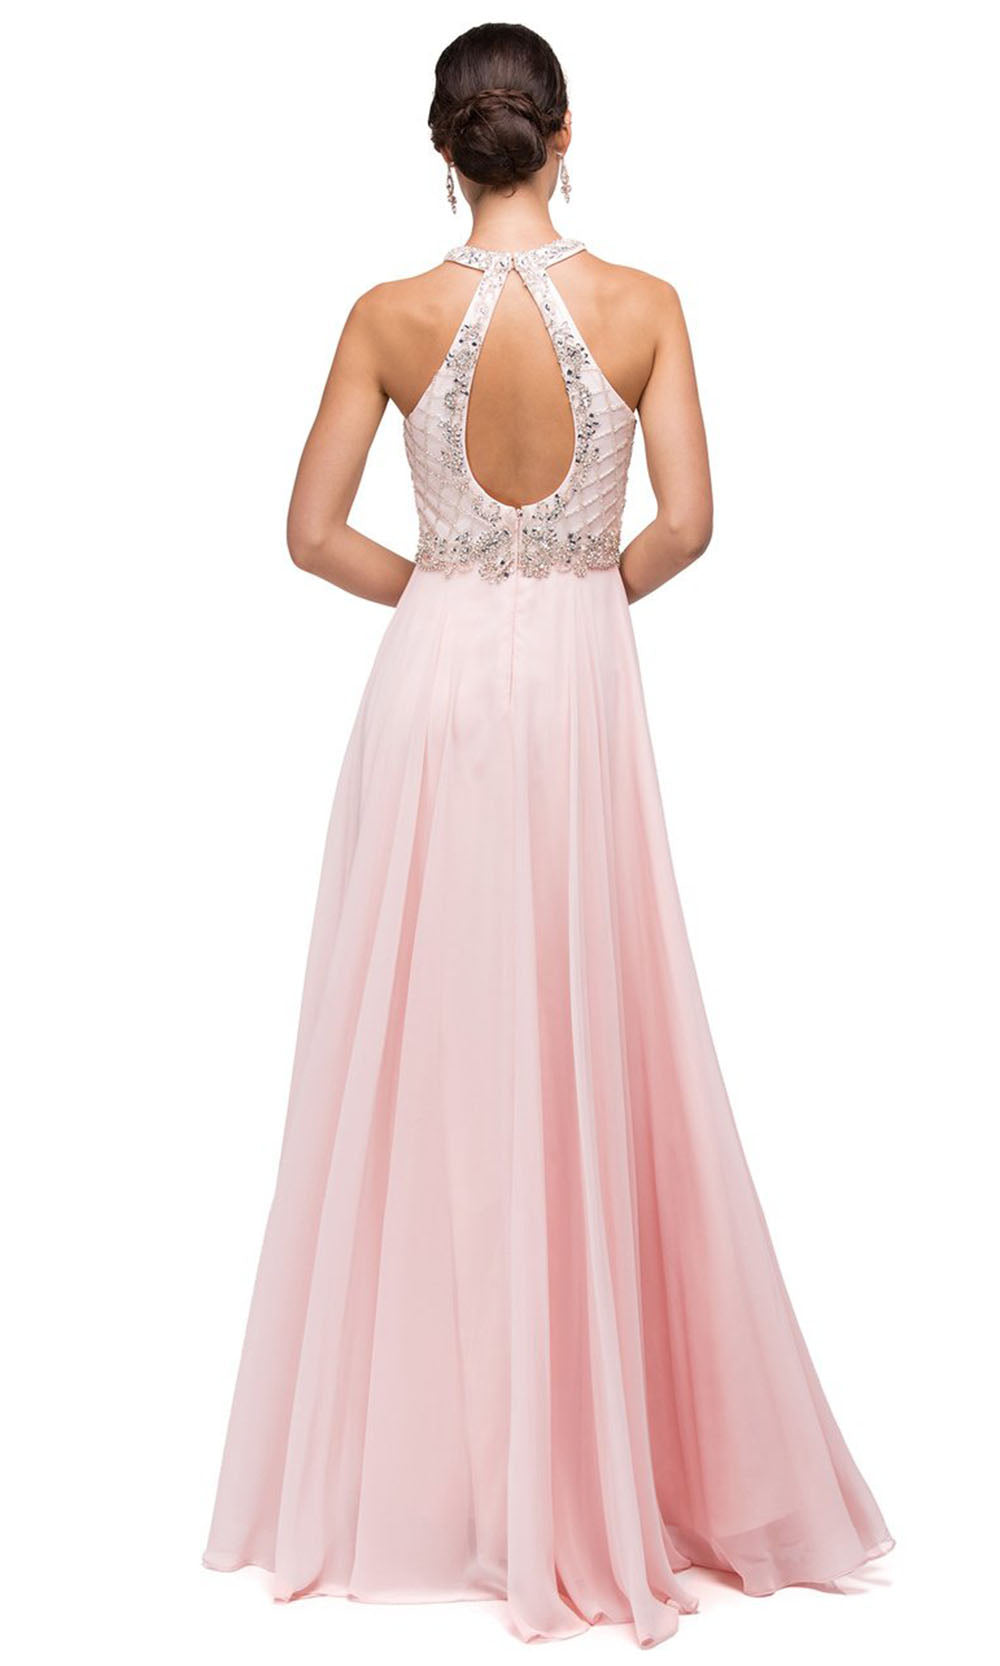 Dancing Queen - 9591 Beaded Cutout Back A-Line Dress In Pink